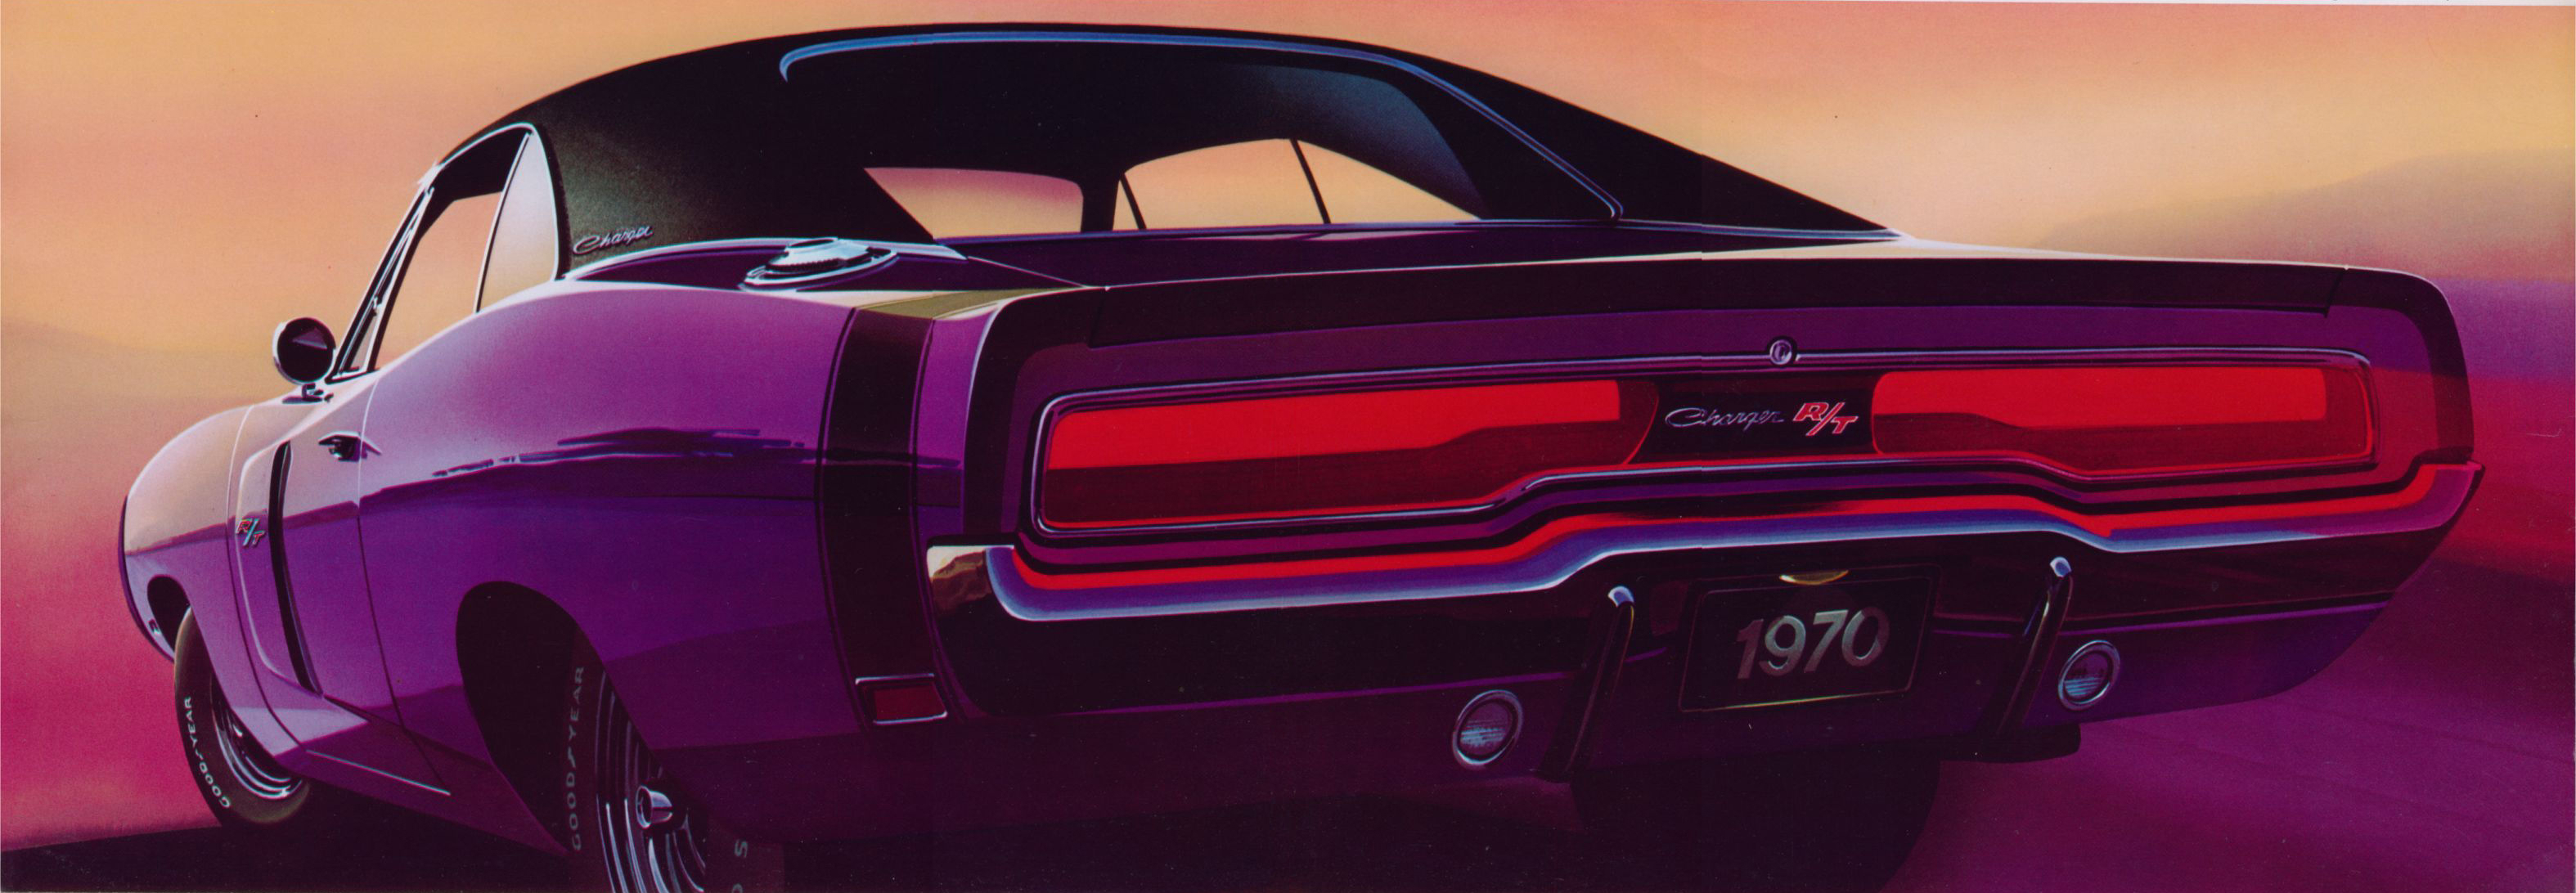  Dodge HQ Background Wallpapers